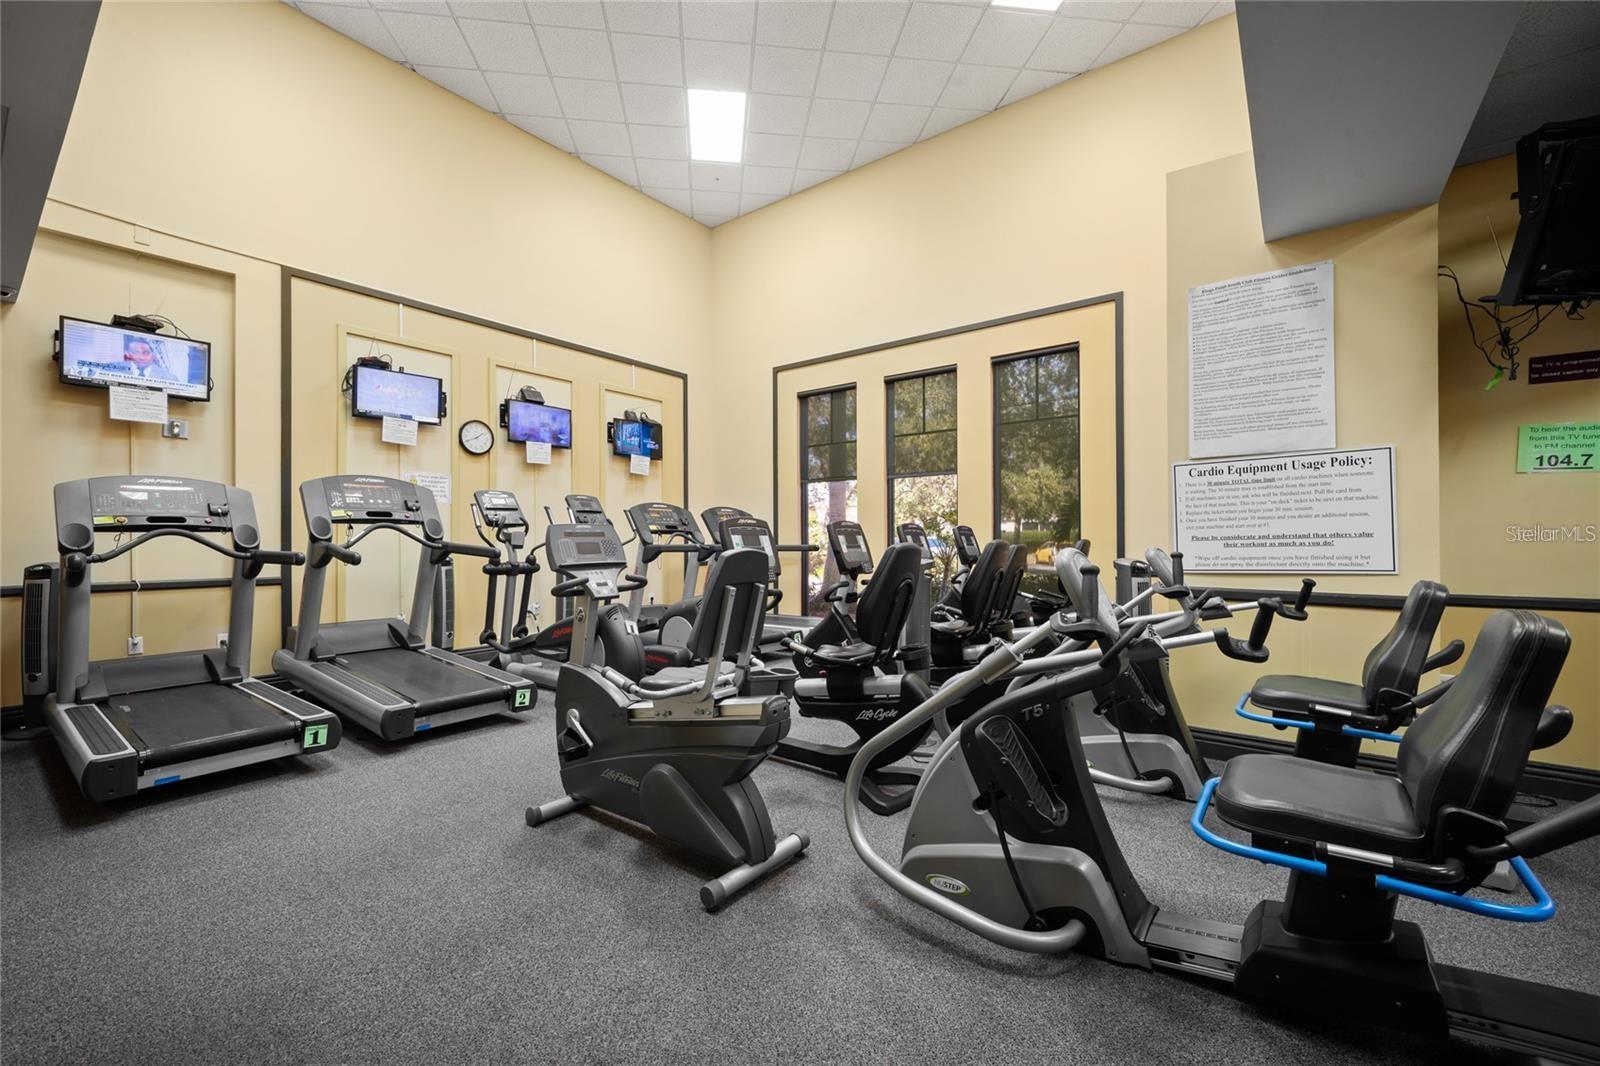 South Club Fitness - Additional Fitness in 2020 Club